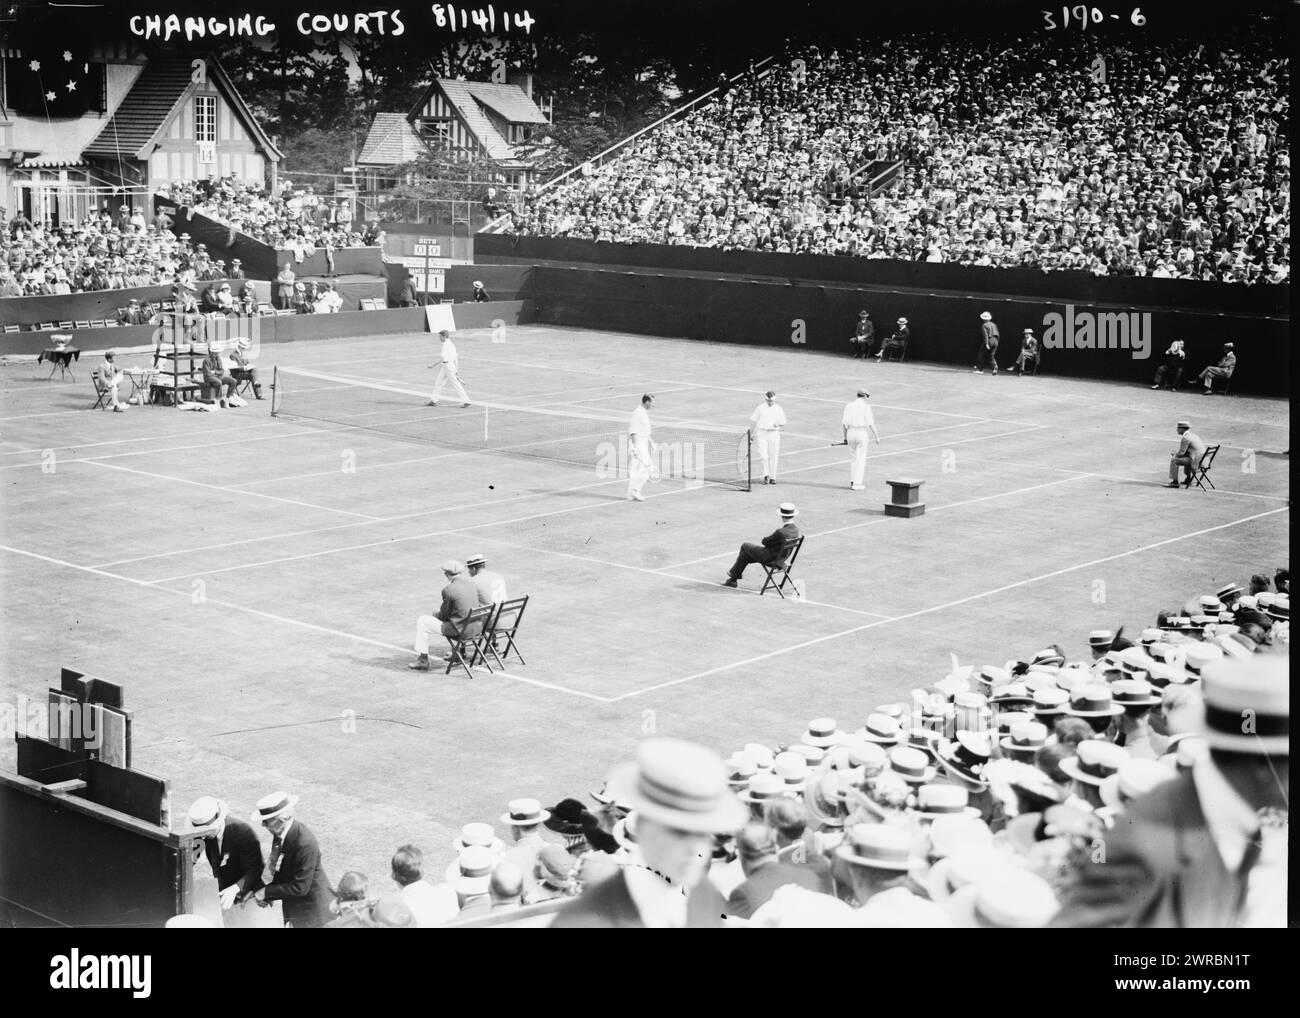 Changing Courts, 8/14/14 (Tennis), Photograph shows the Davis Cup Match between the American team (Maurice E. McLoughlin and Thomas A. Bundy) and the Australian team (Anthony F. Wilding and Norman E. Brookes) at the West Side Tennis Club, Forest Hills, Long Island, New York. The Davis Cup is at left on a table., 1914 Aug. 14, Glass negatives, 1 negative: glass Stock Photo